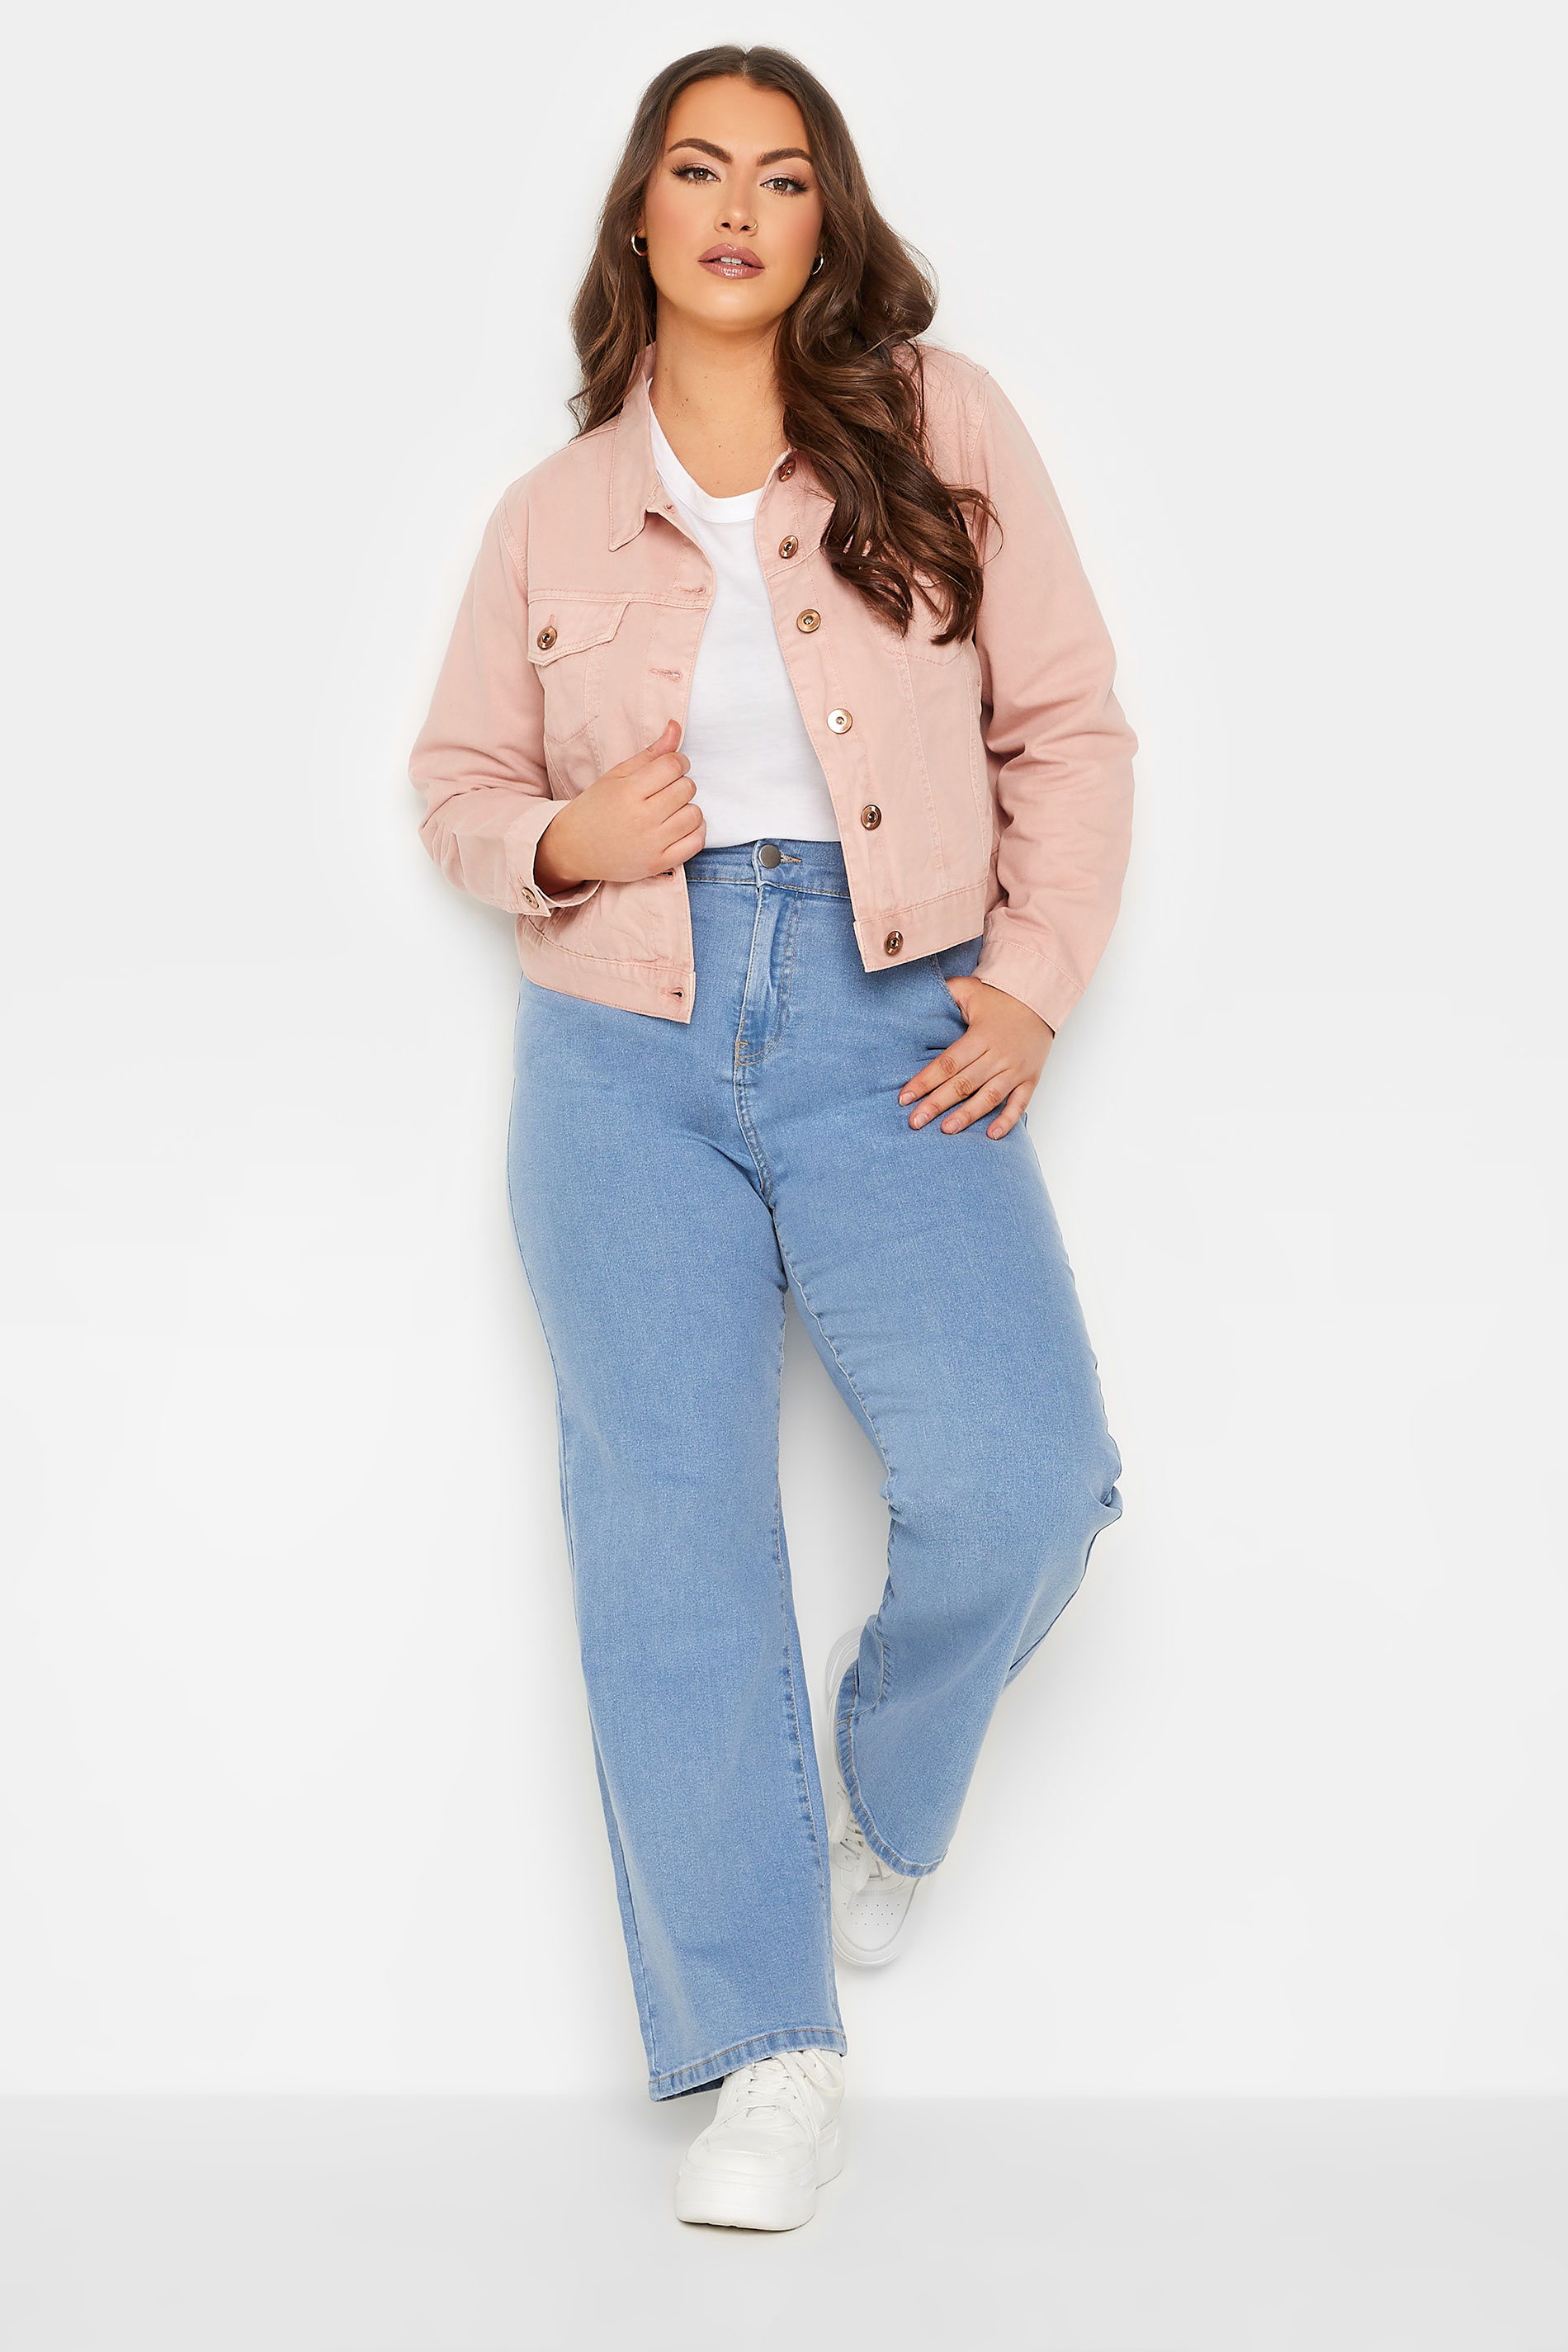 YOURS Plus Size Pink Denim Jacket | Yours Clothing 2